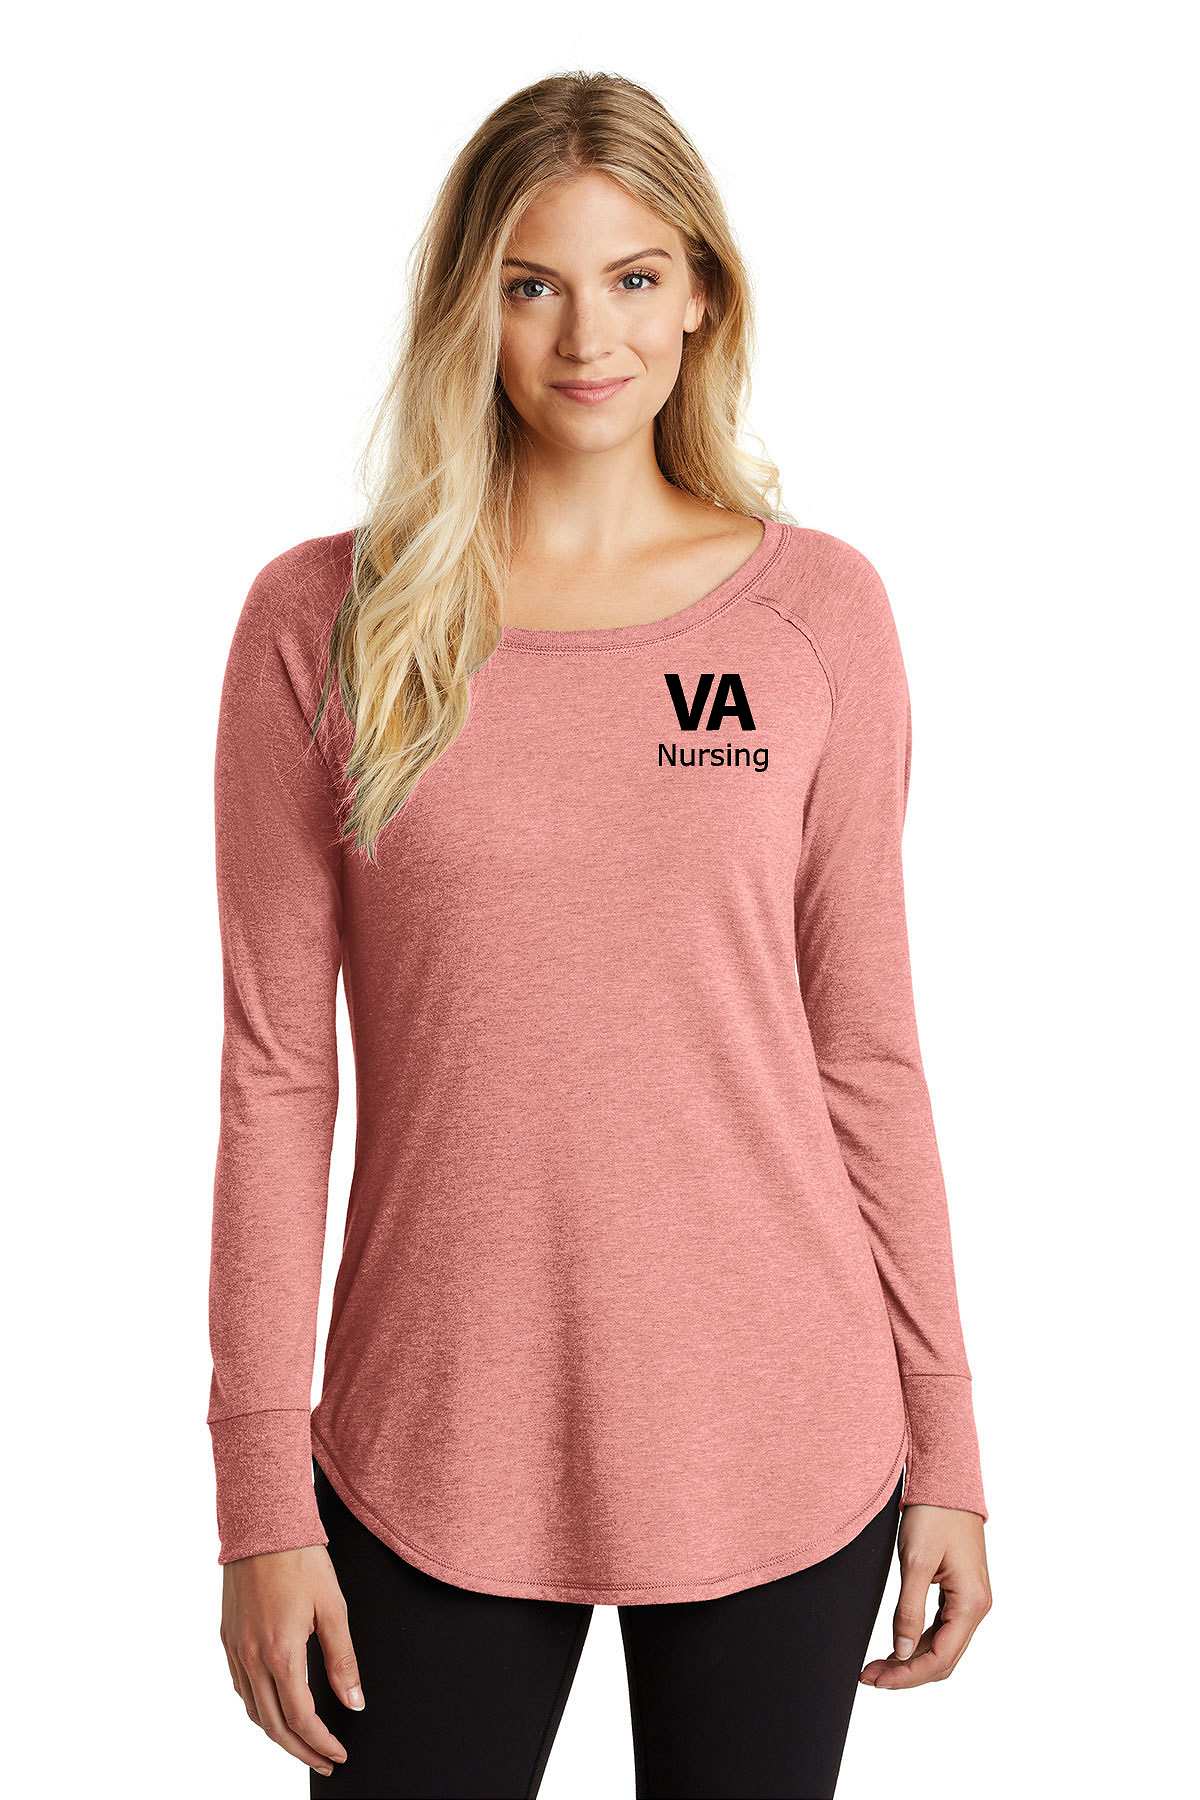 Veterans Affairs Printed Ladies DT132L, District long sleeve tunic